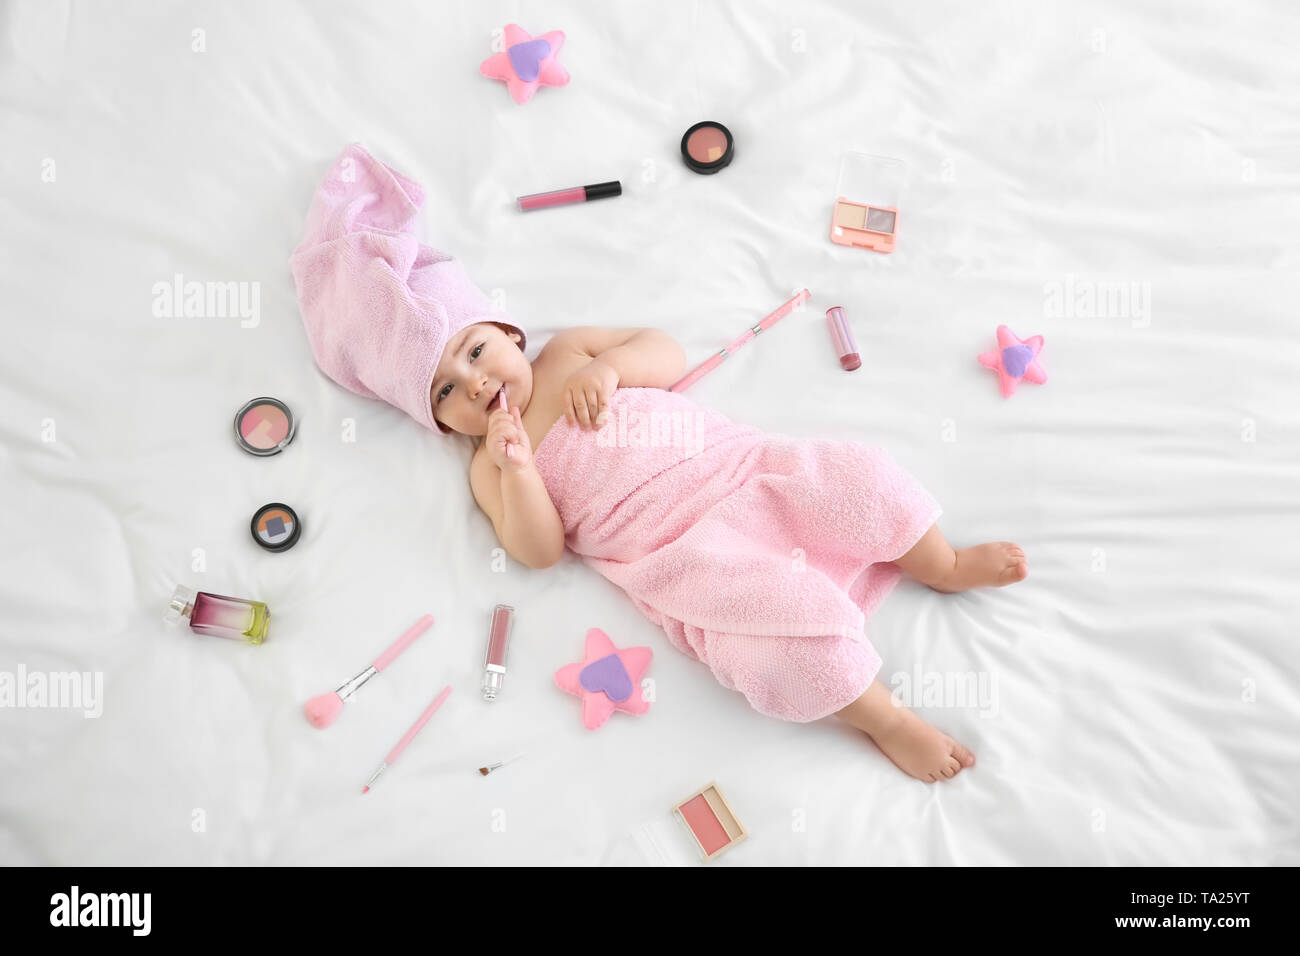 Cute baby girl with cosmetics lying on bed Stock Photo - Alamy